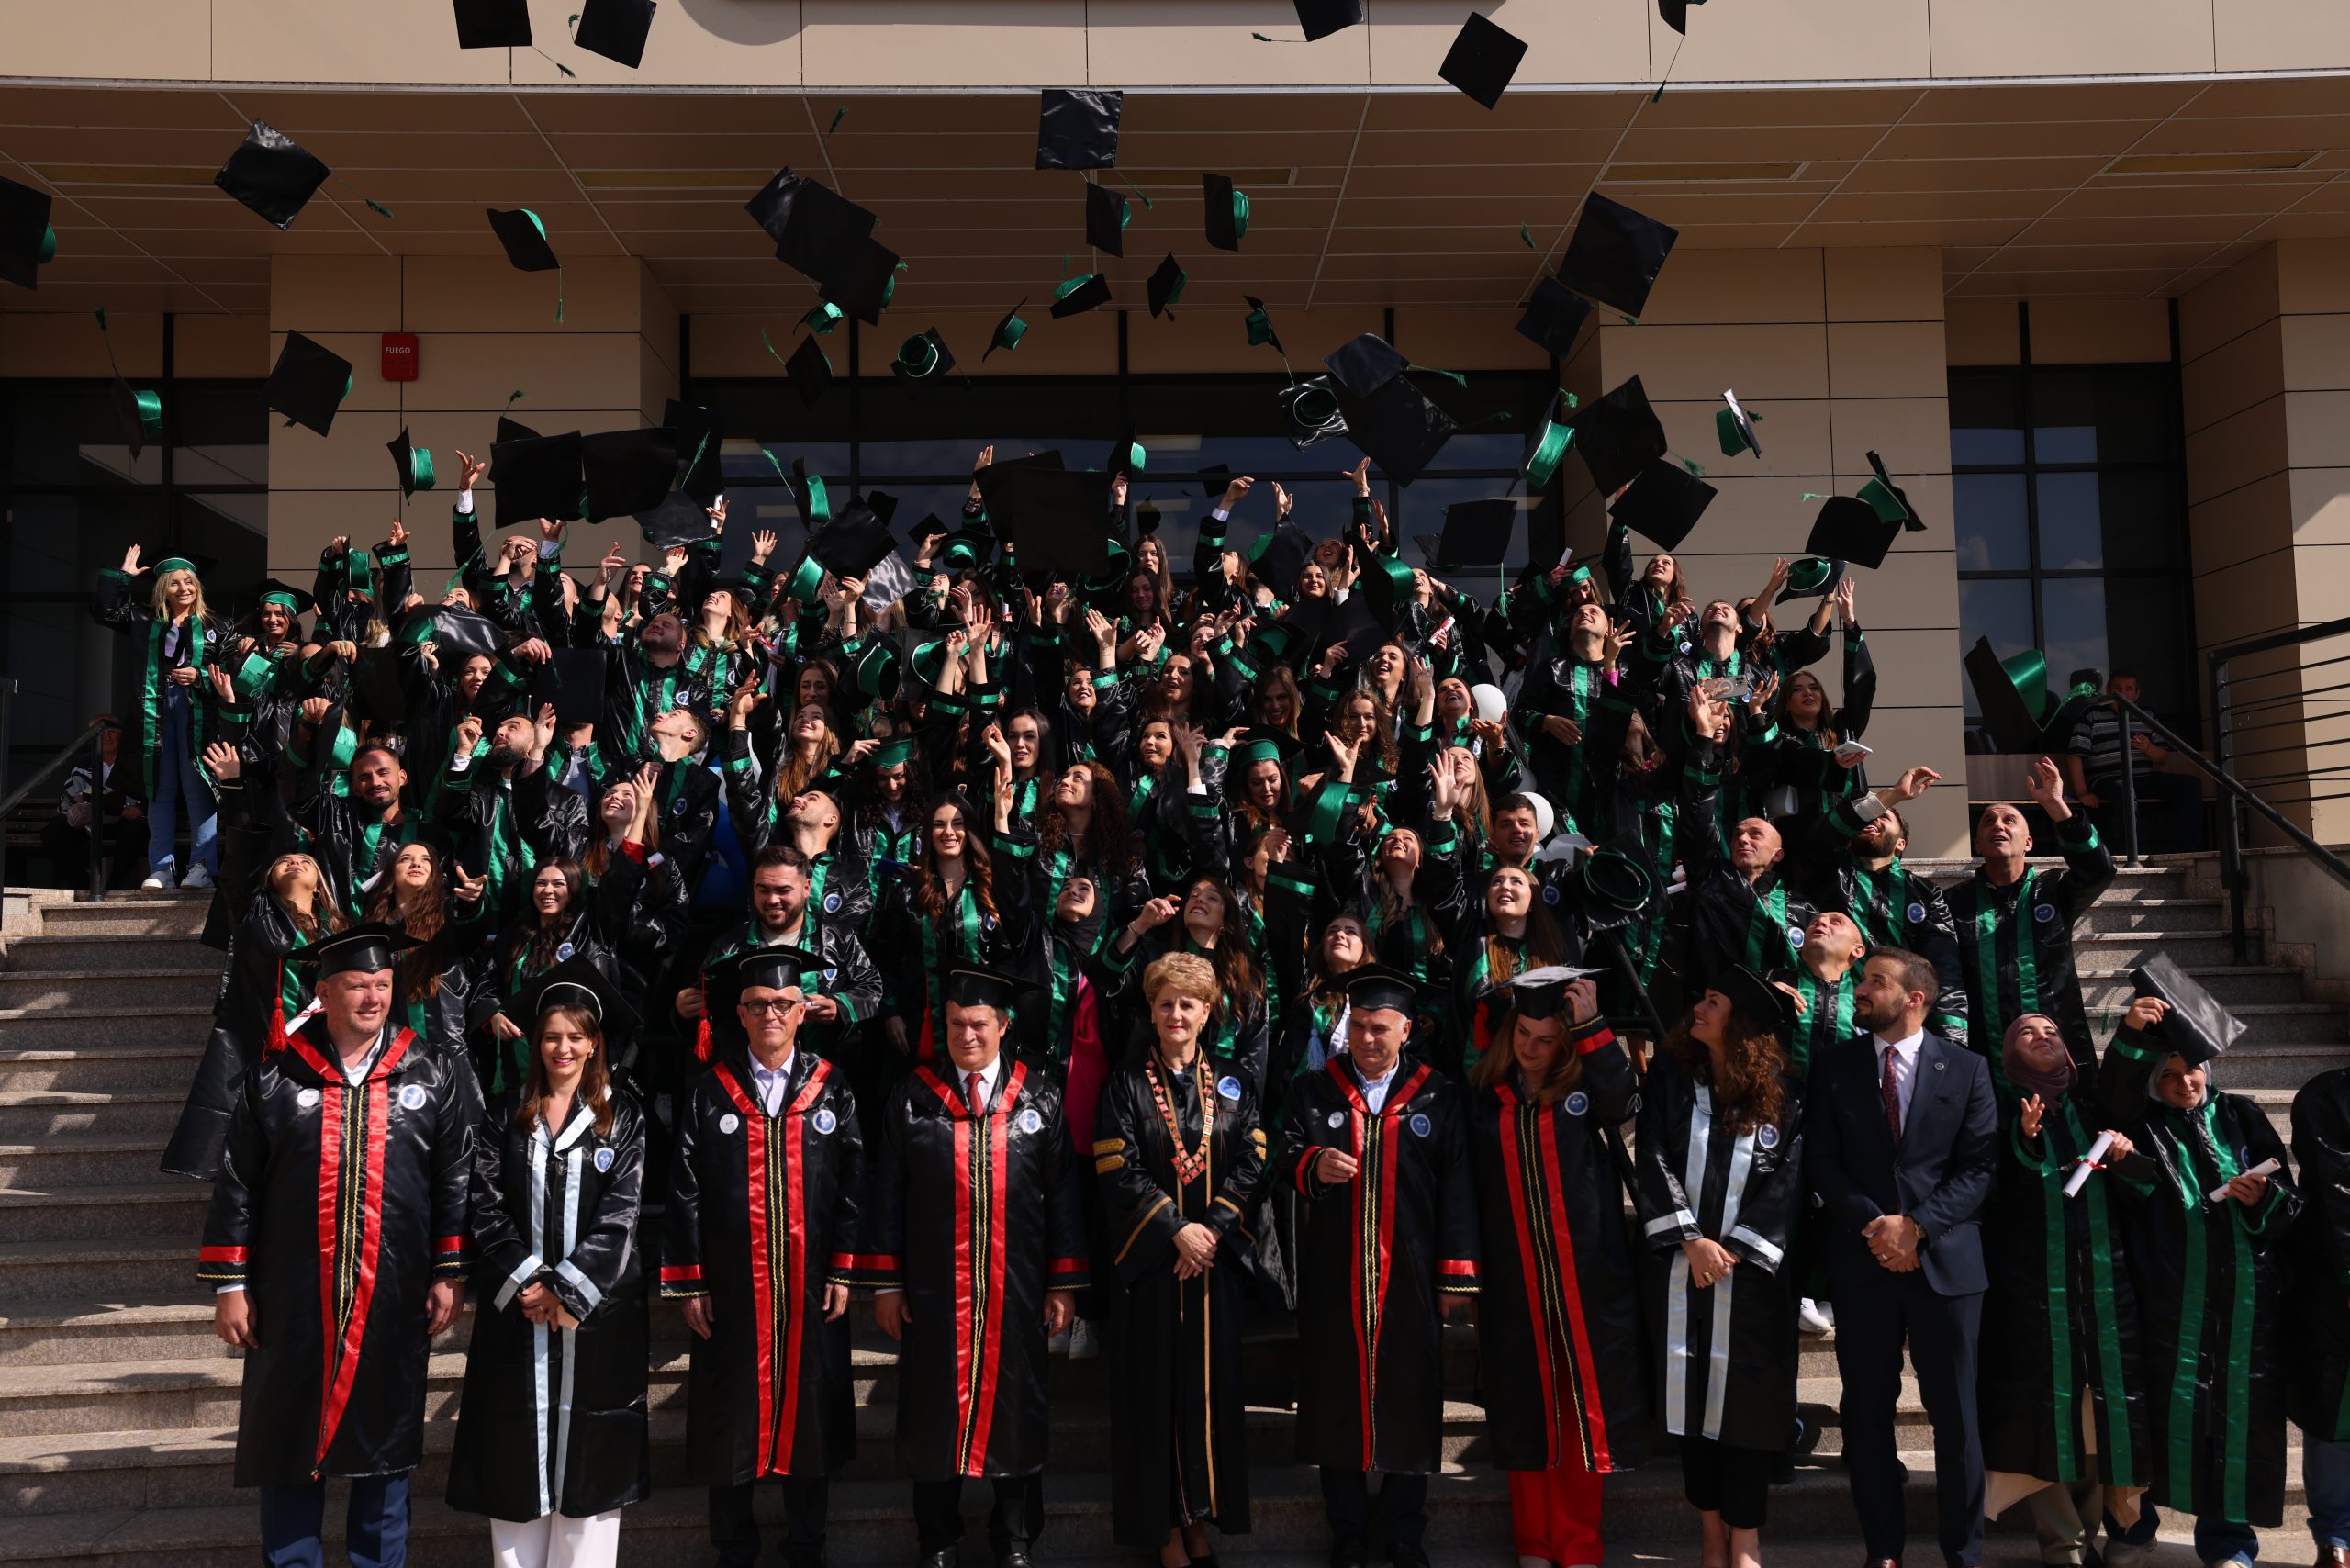 The Graduation Ceremony For The Academic Year 2022/23 Was Held